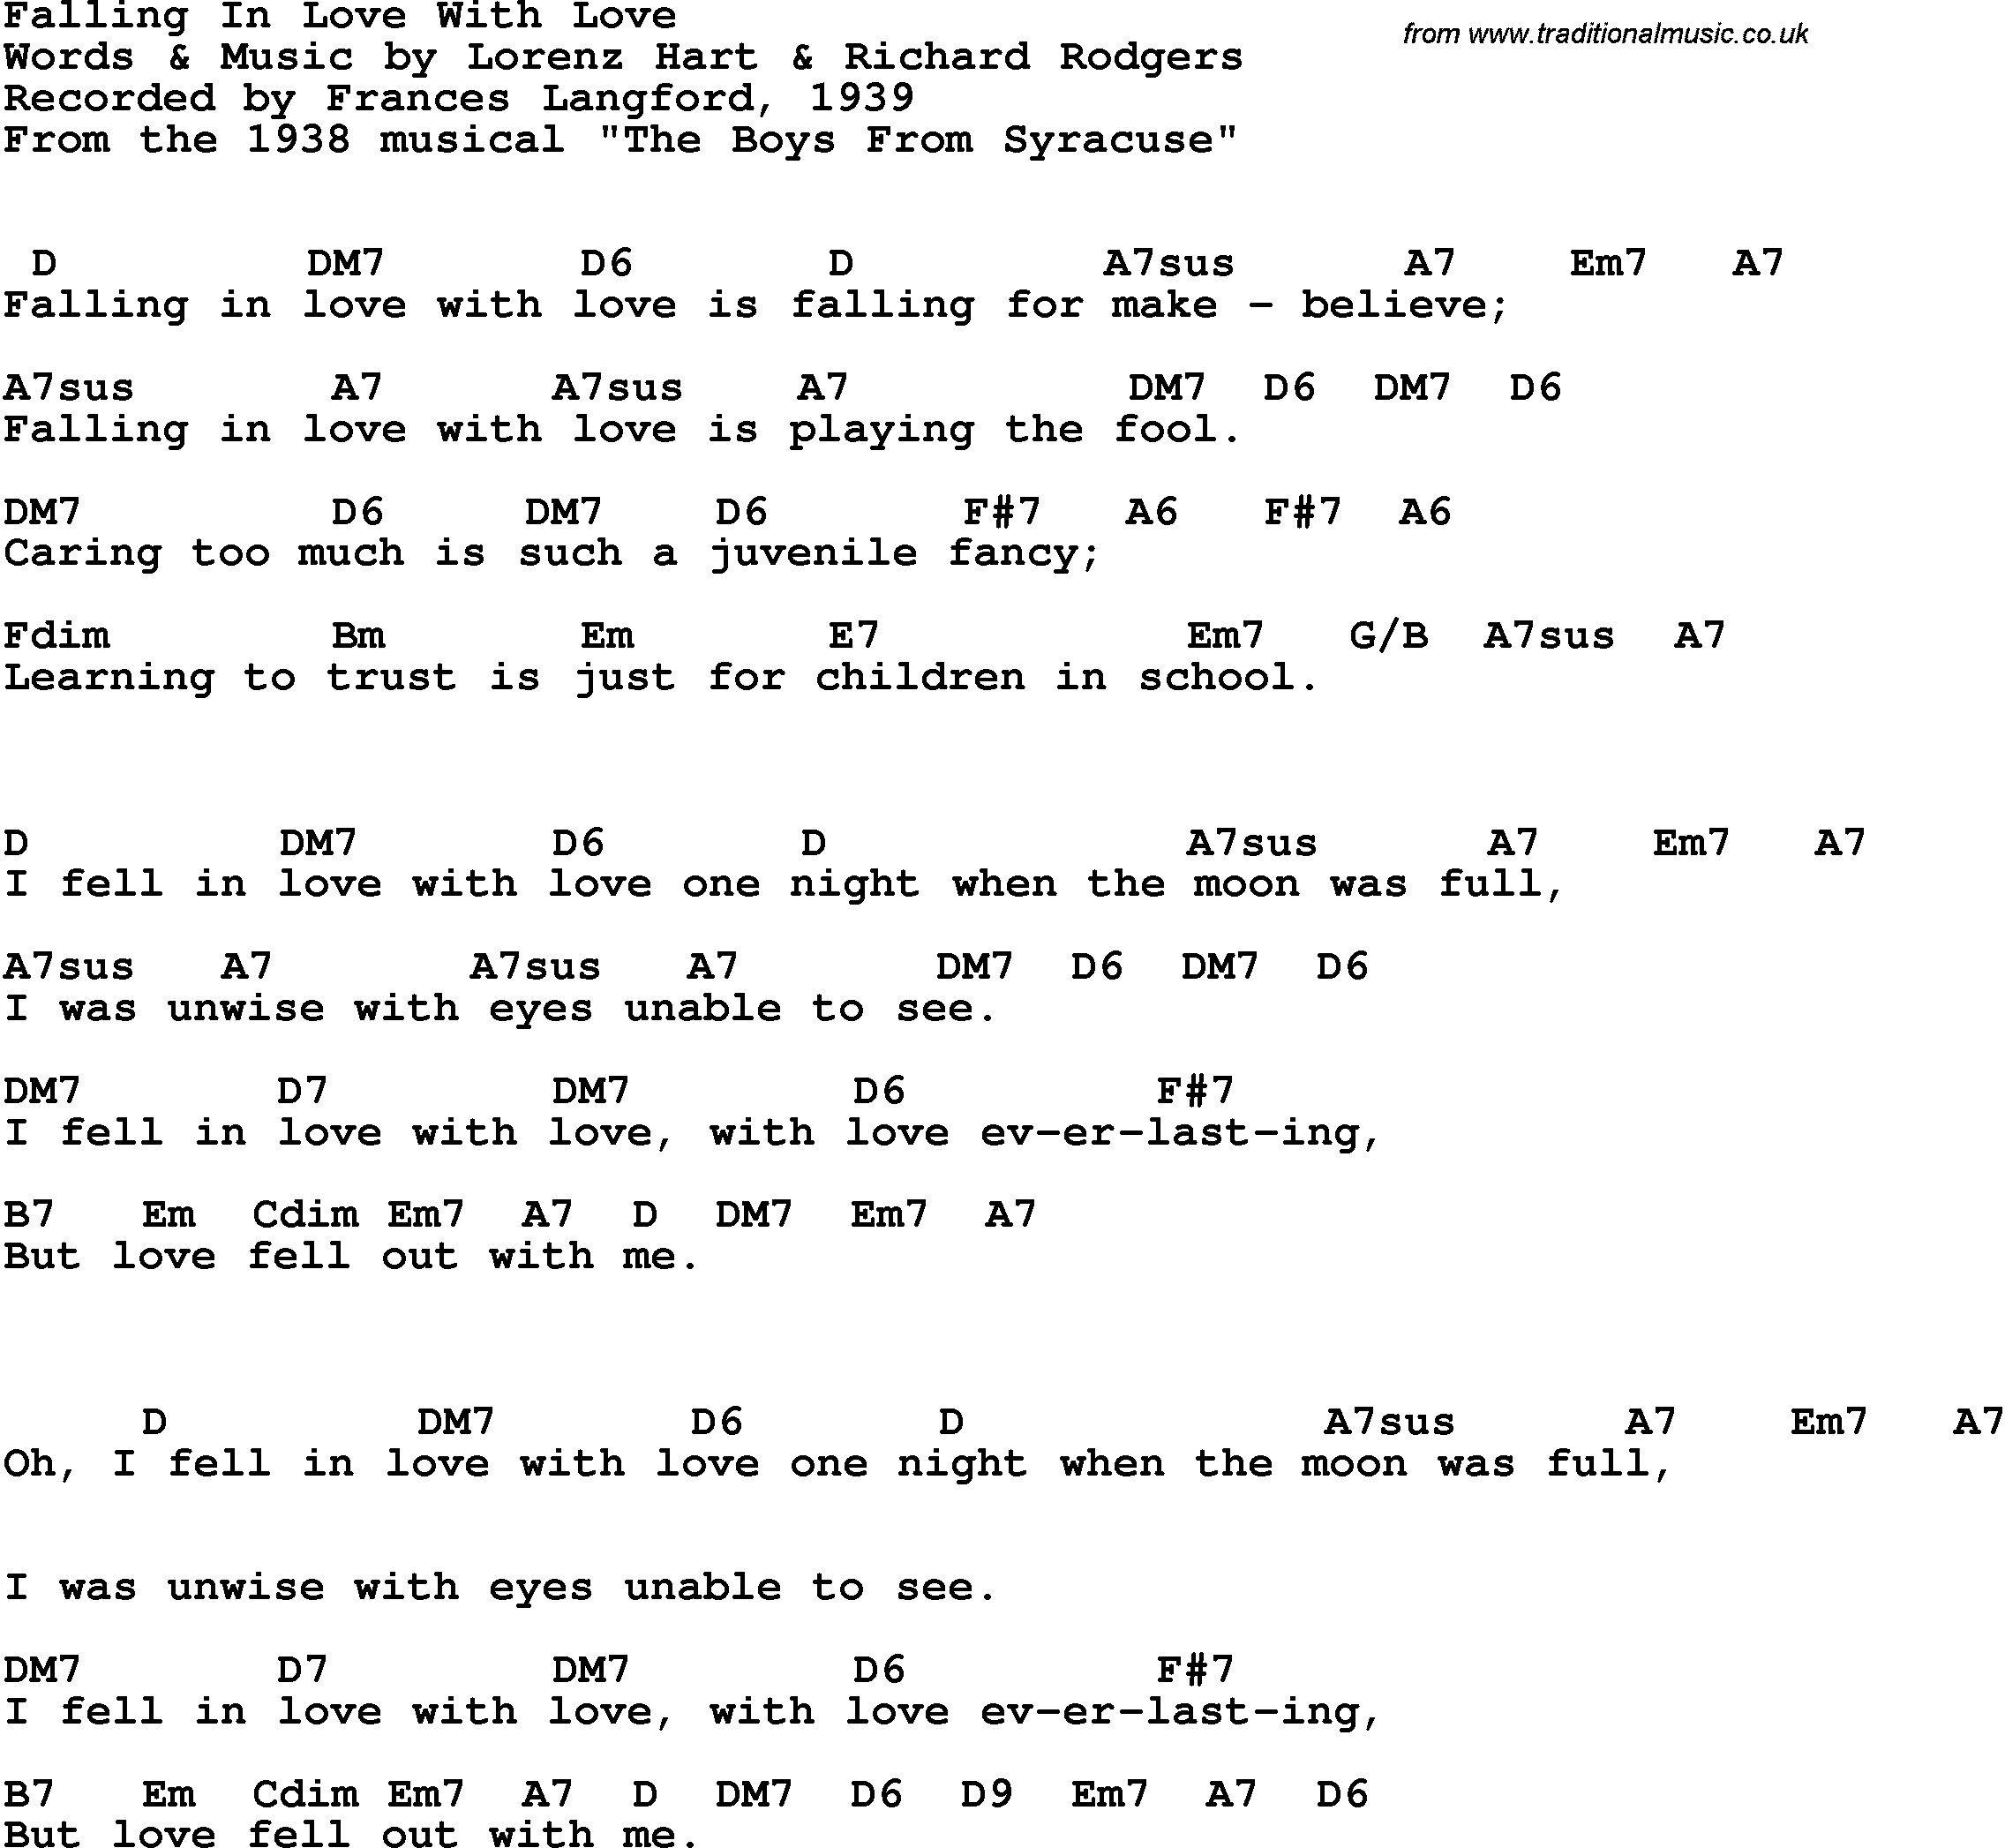 Song Lyrics with guitar chords for Falling In Love With Love - Frances Langford, 1939